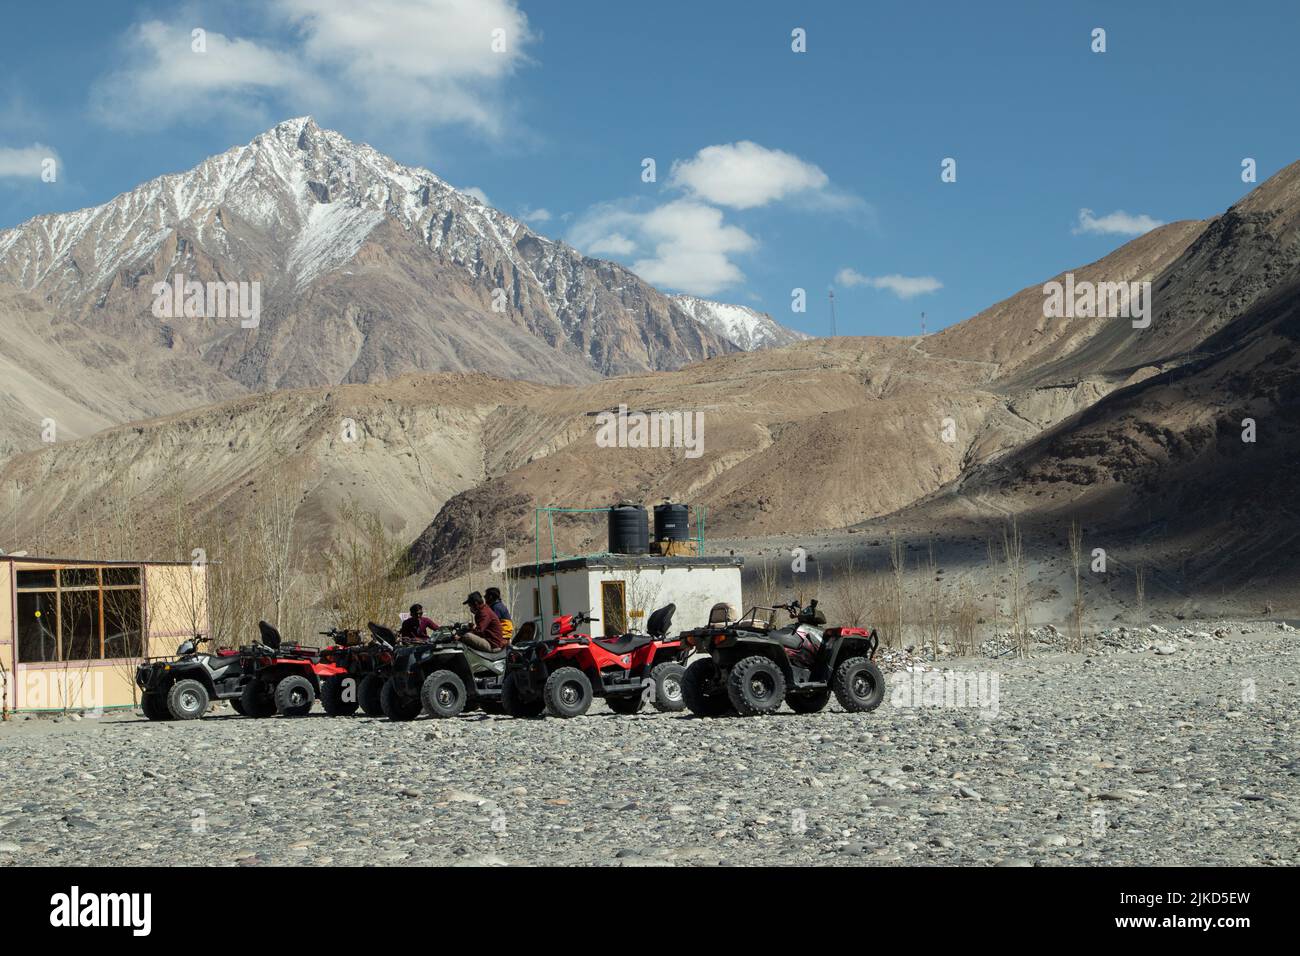 North Pullu, Leh, Indien 08 April 2022 - Go Cart oder Kart Adventure Sports Station for Joy Ride through the Rocky Hills and Mountain of Great Himalayas Stockfoto